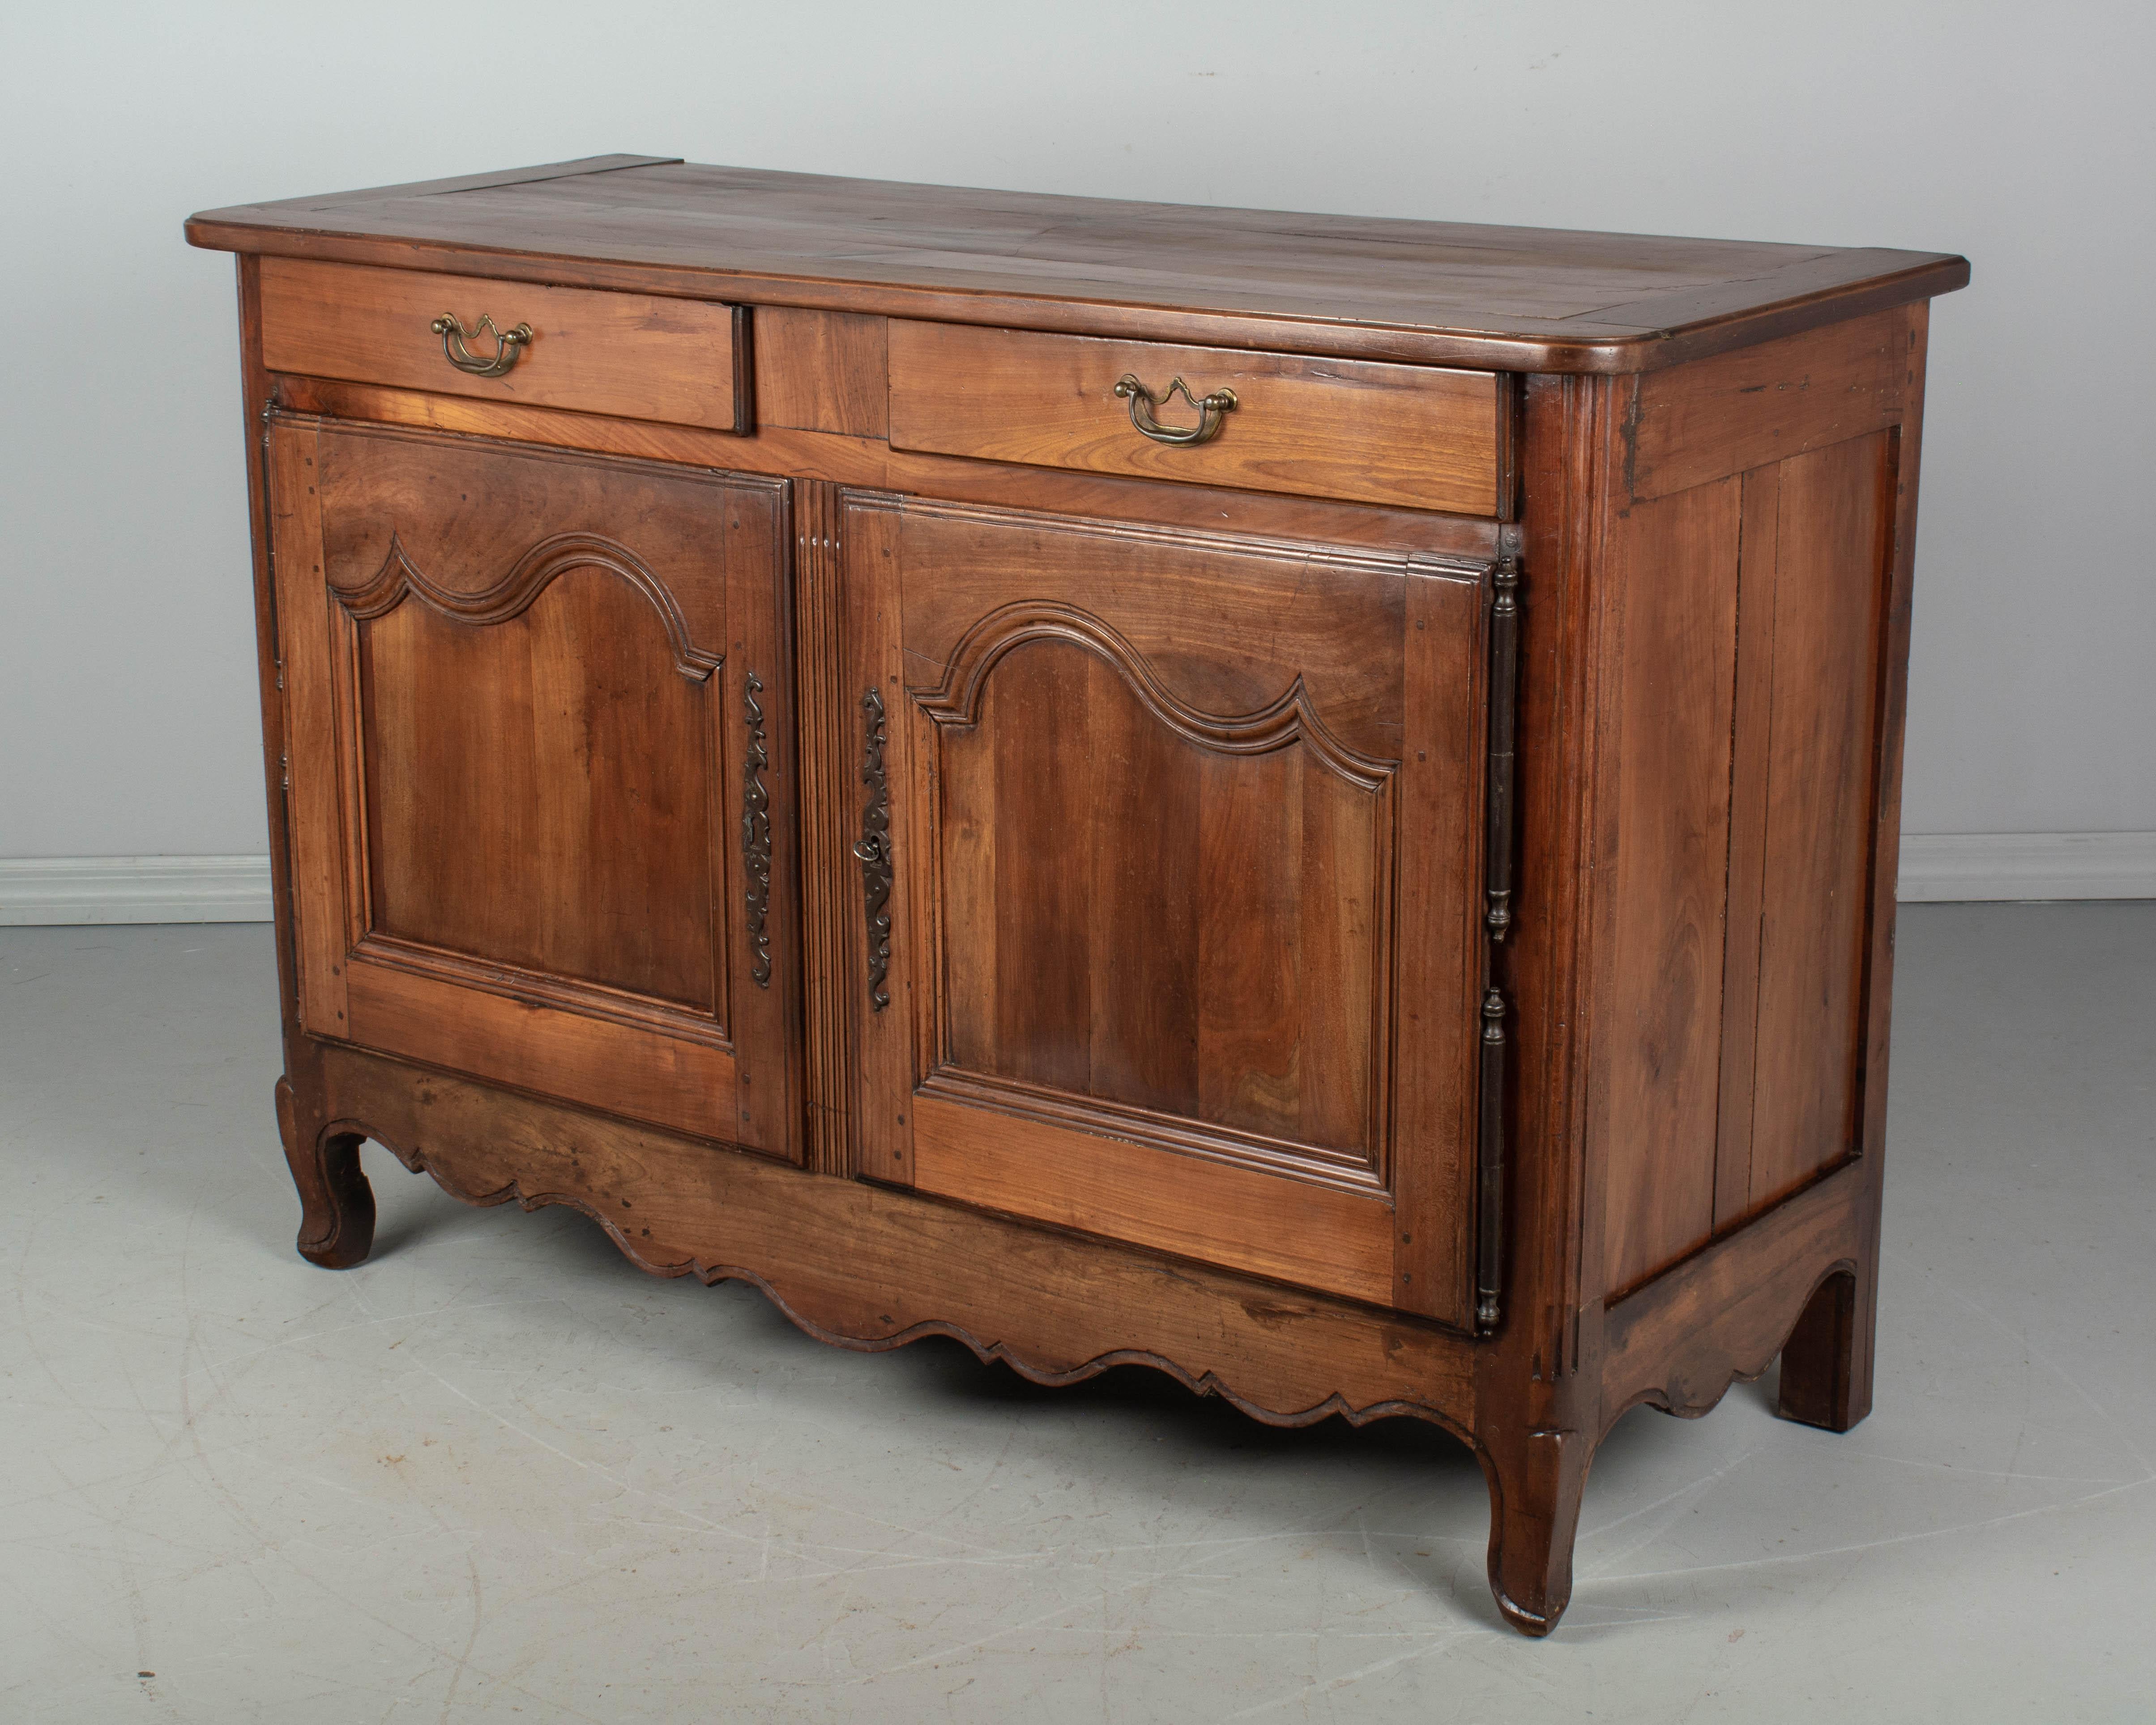 A 19th century Louis XV style country French buffet from Normandy made of solid cherrywood. Simple hand carved panel doors and scalloped apron. Interior provides ample storage, opening to a single shelf. Working lock and key. Two dovetailed drawers